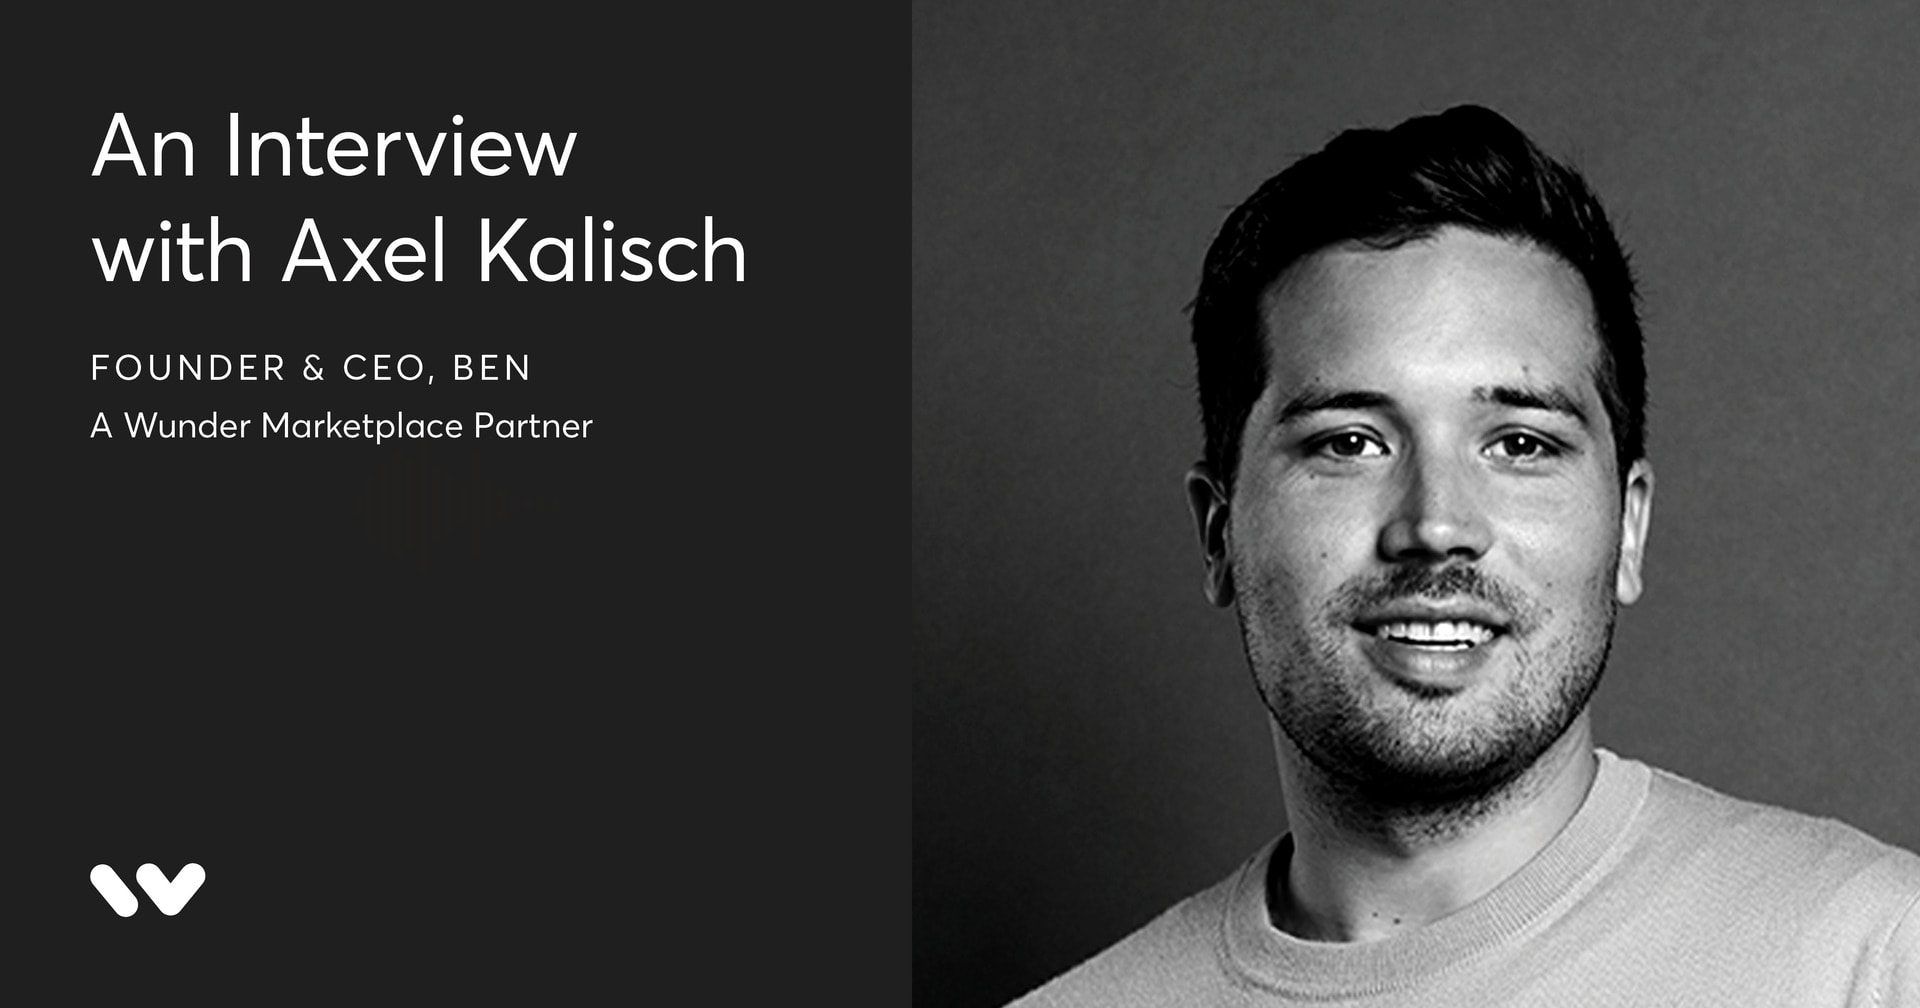 Template titled "An Interview with Axel Kalisch founder & CEO Ben, a Wunder Marketplace Partner".